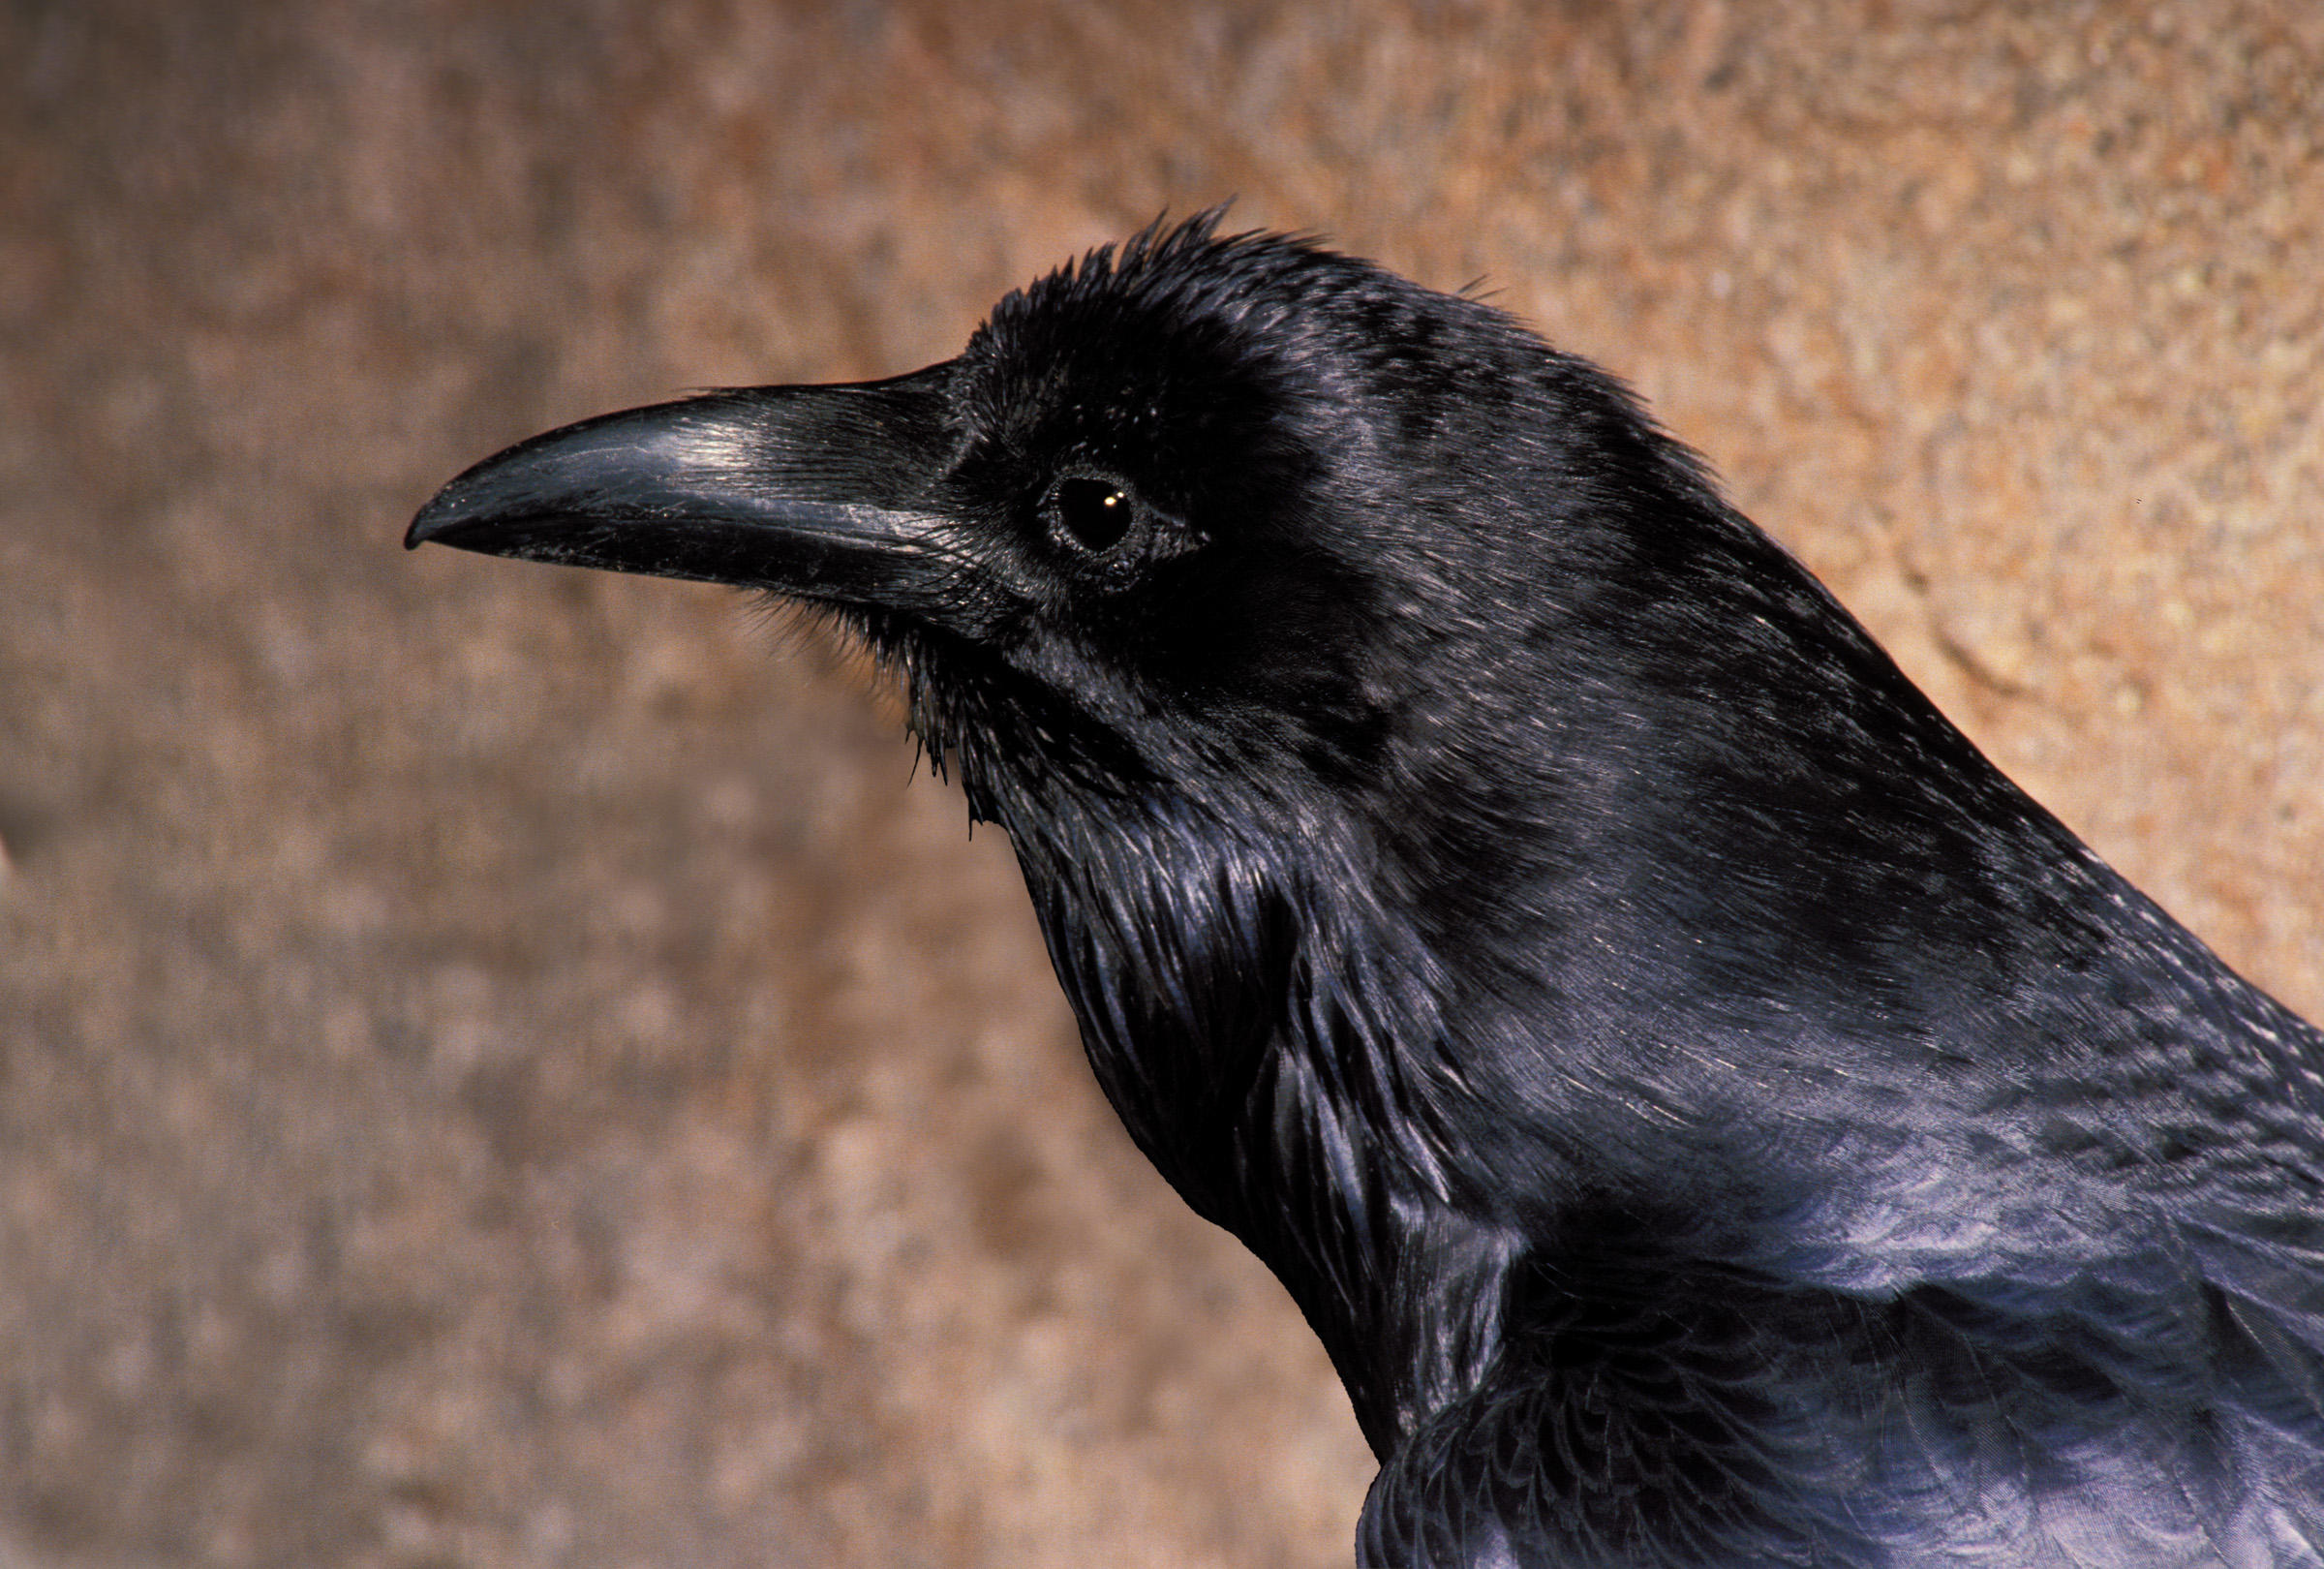 Raven wallpapers, Animal photography, HQ pictures, 4K resolution, 2400x1620 HD Desktop